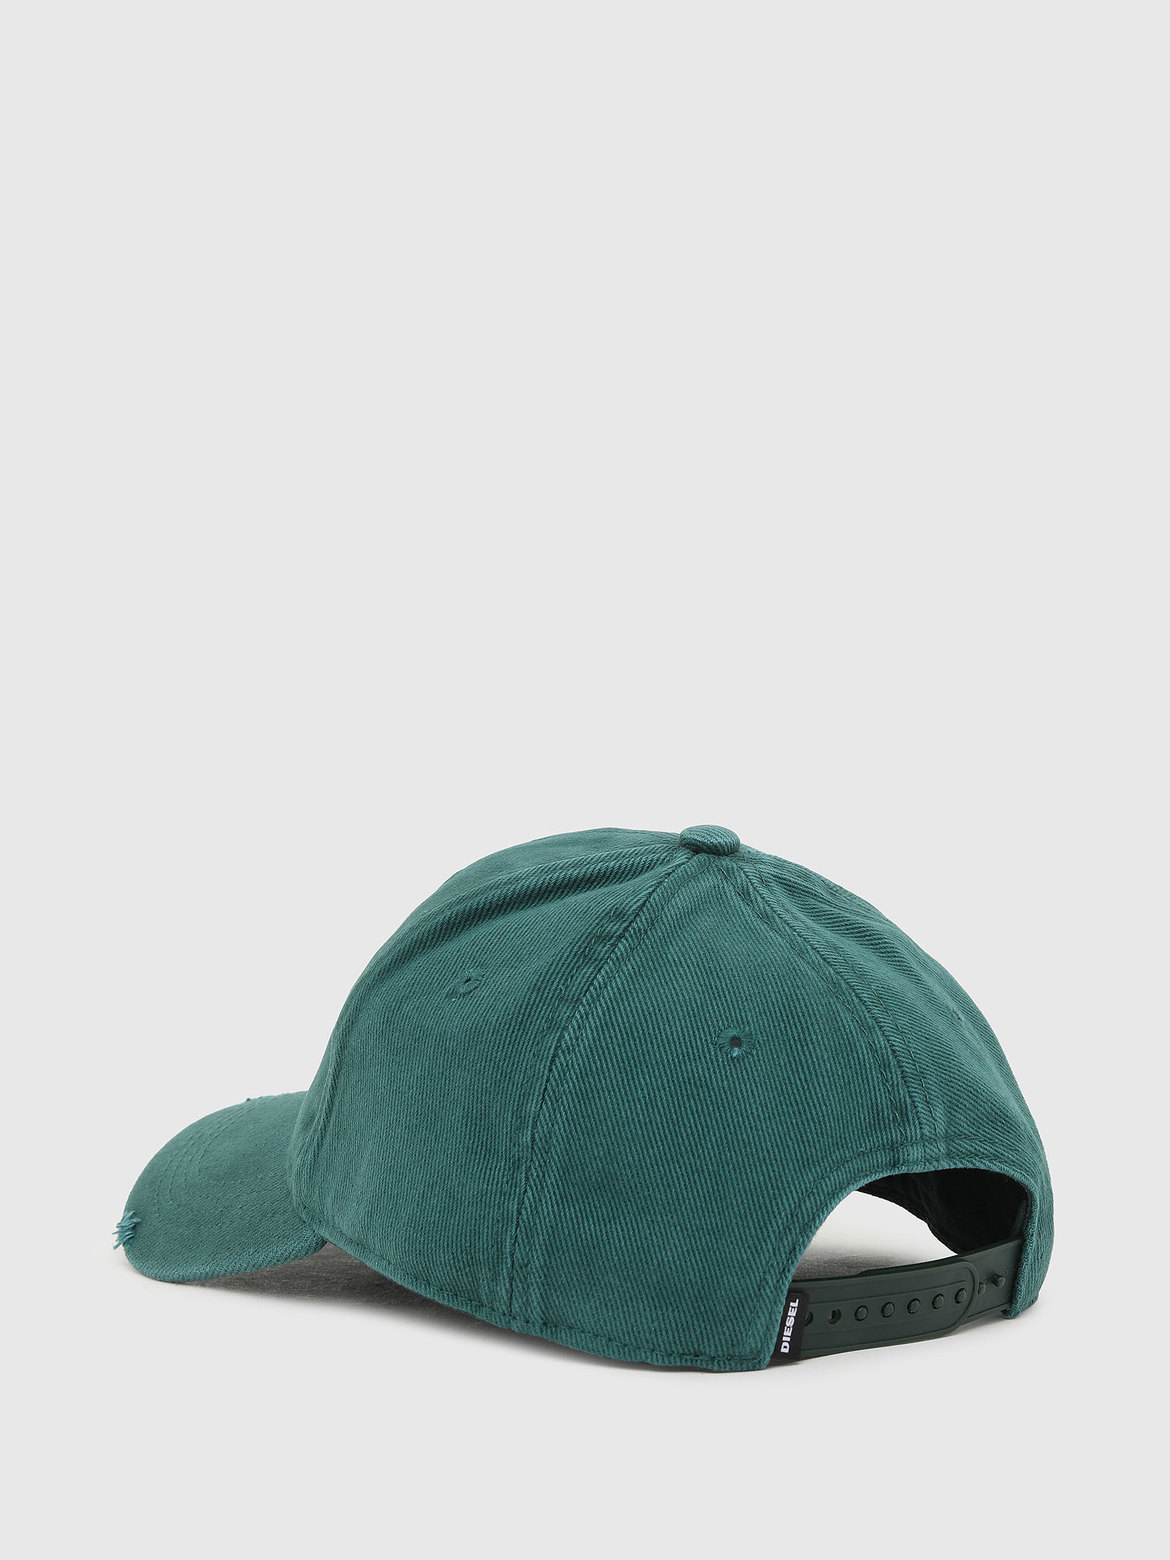 Twill Baseball Cap with Mohawk Patch | Diesel